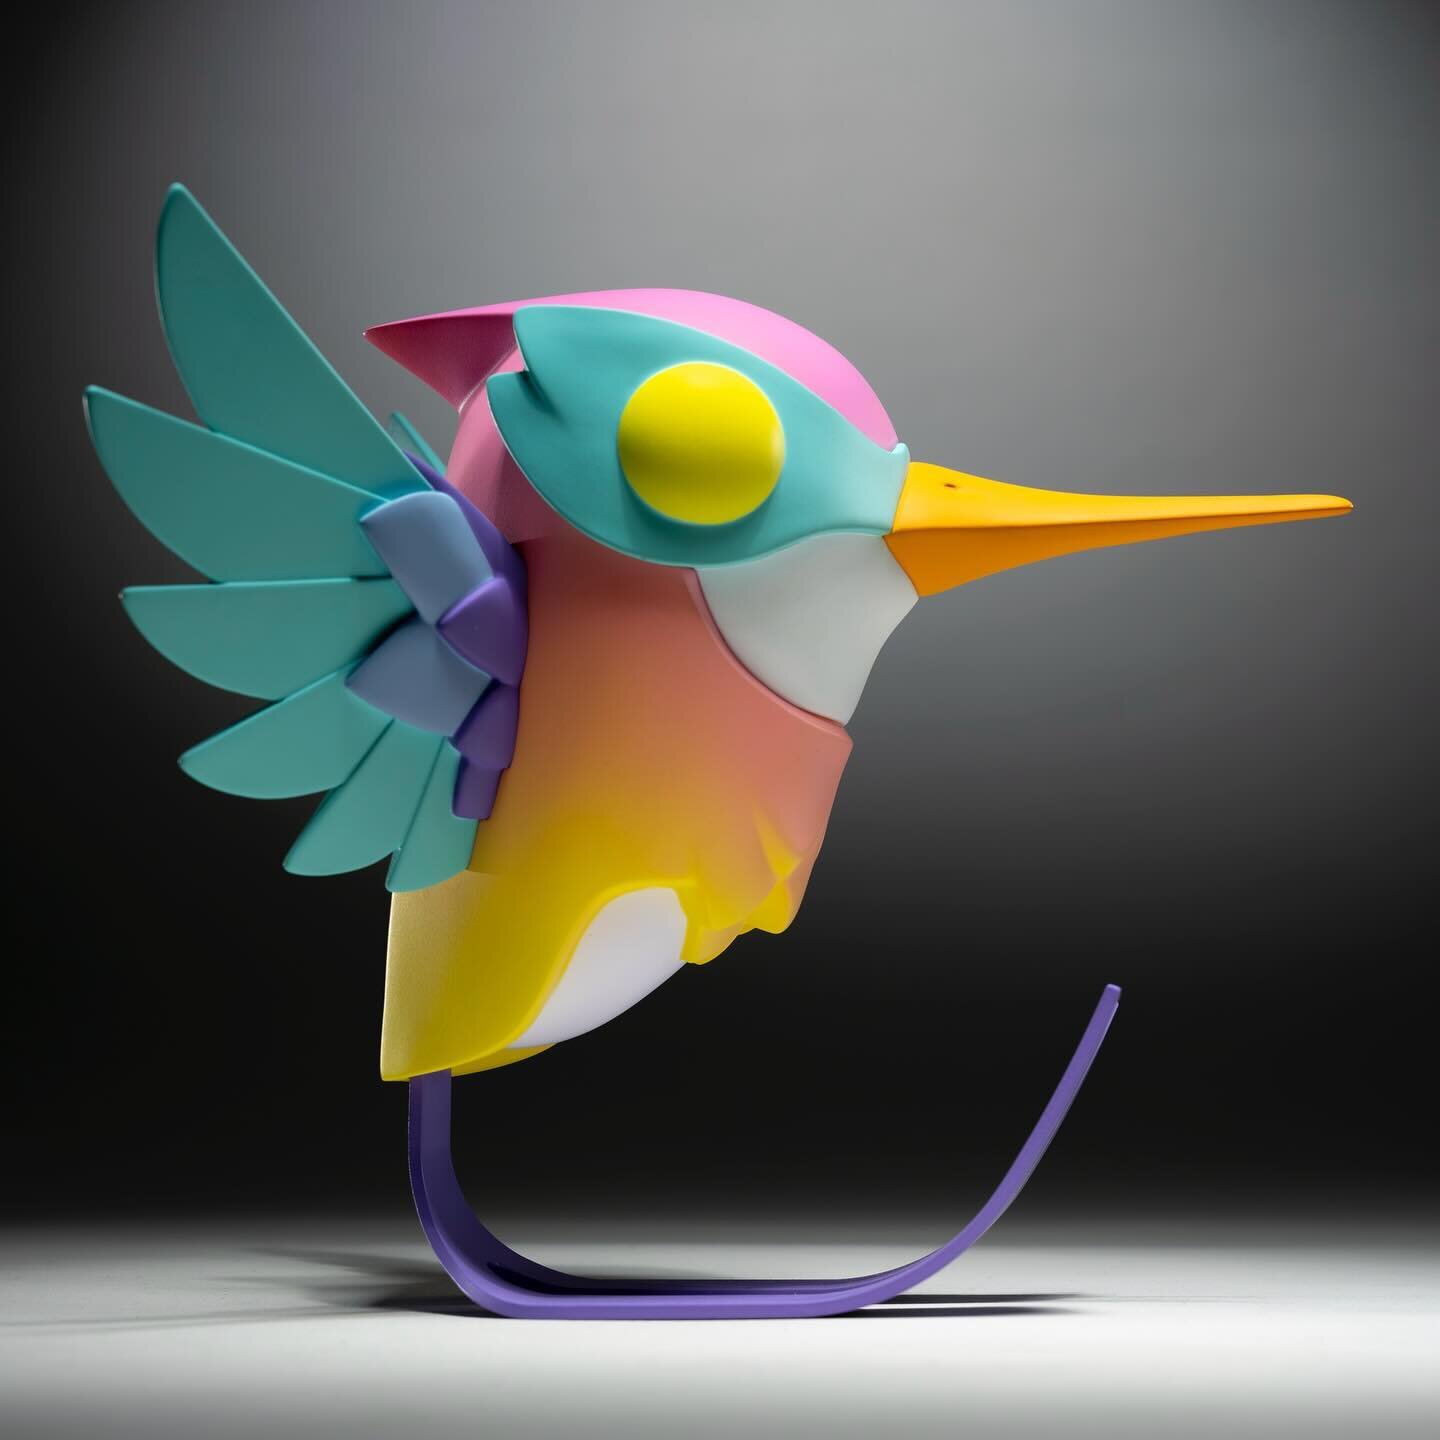 We are thrilled to introduce you to KOKO, the blissful hummingbird from our recent solo exhibition who is about to take flight in vinyl for the very first time.  
KOKO  6&rsquo;&rsquo; and 4&rsquo;&rsquo; vinyl sculptures Available April 4-7 at TTE &